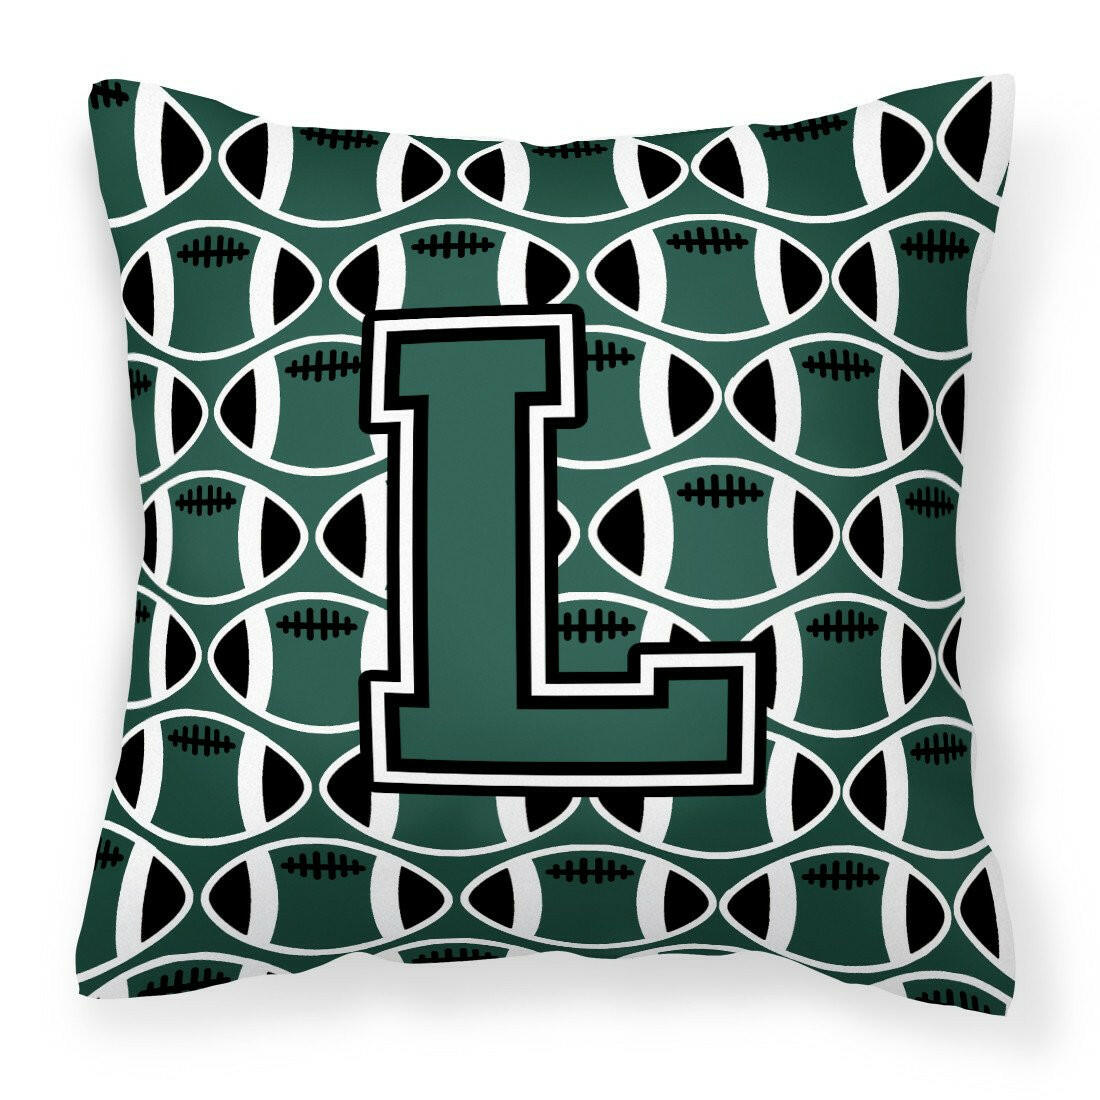 Letter L Football Green and White Fabric Decorative Pillow CJ1071-LPW1414 by Caroline's Treasures